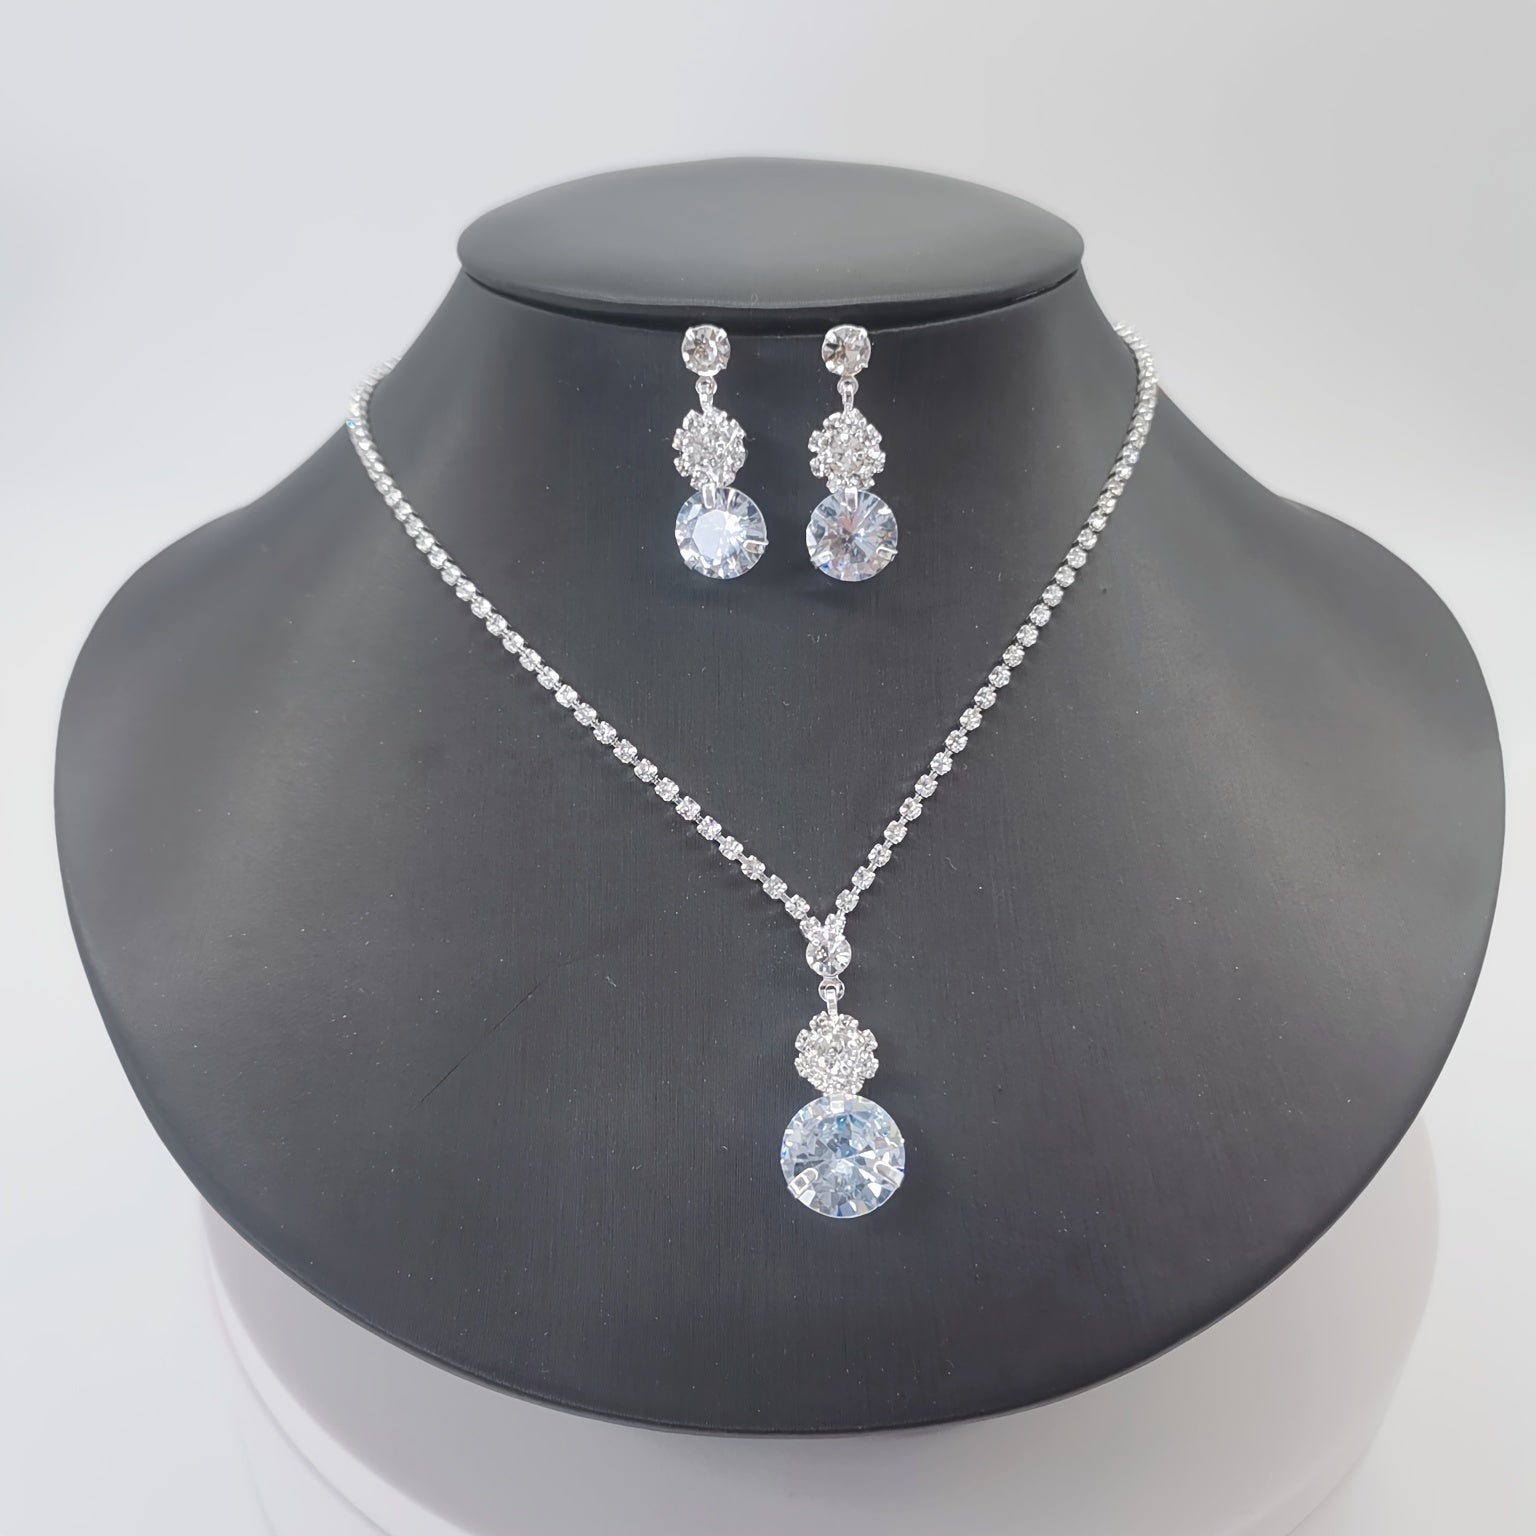 Elegant Flower-Shaped Rhinestone Jewelry Set with Shiny Round-Cut Zircon Pendant Necklace and Dangle Earrings - Perfect for Weddings, Proms, and Special Occasions